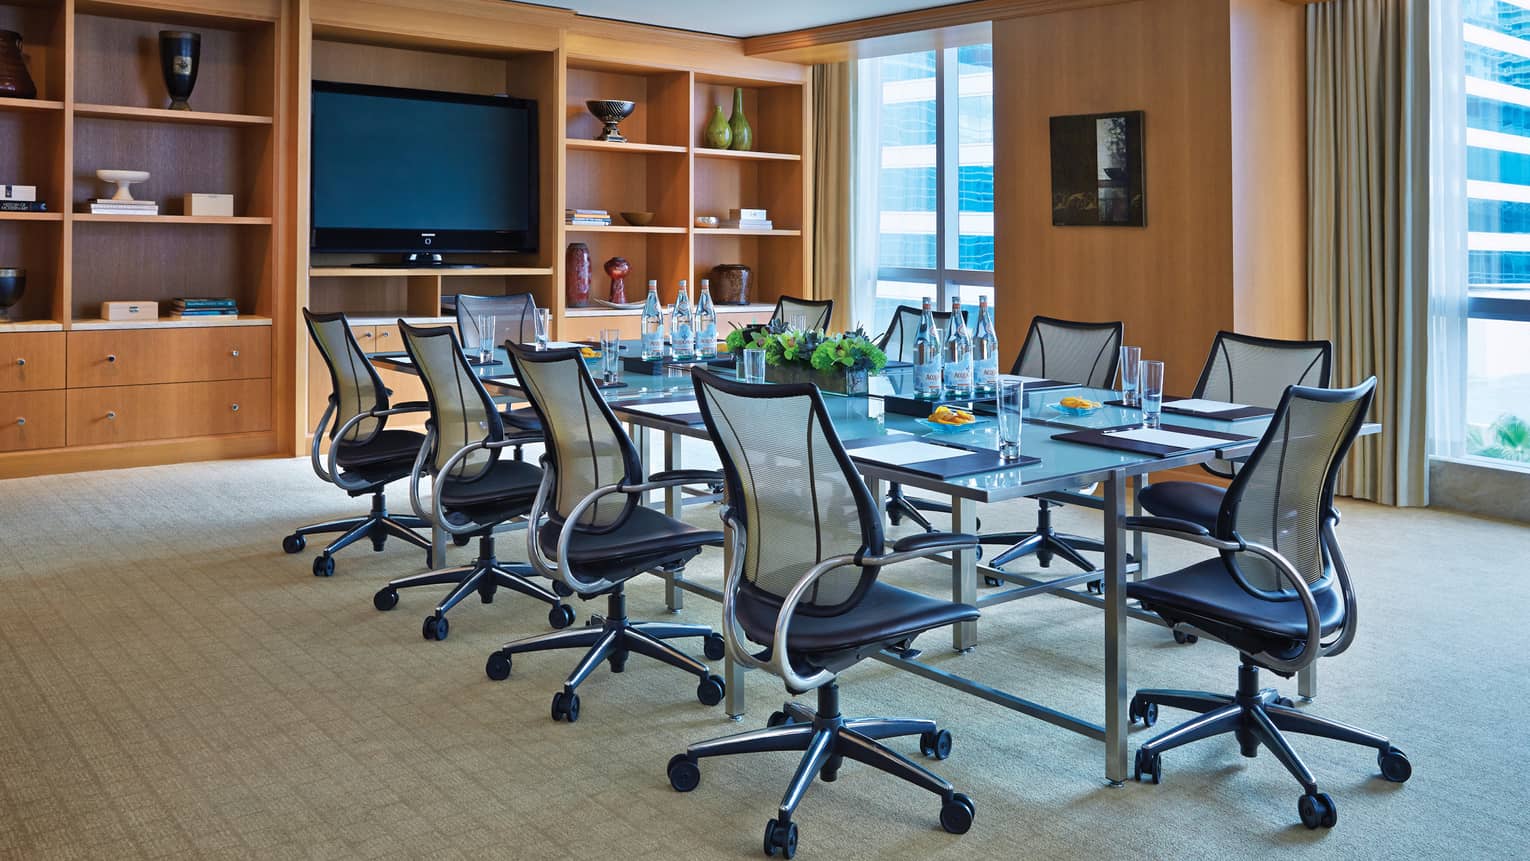 Swivel chairs line boardroom table in bright meeting room with shelves